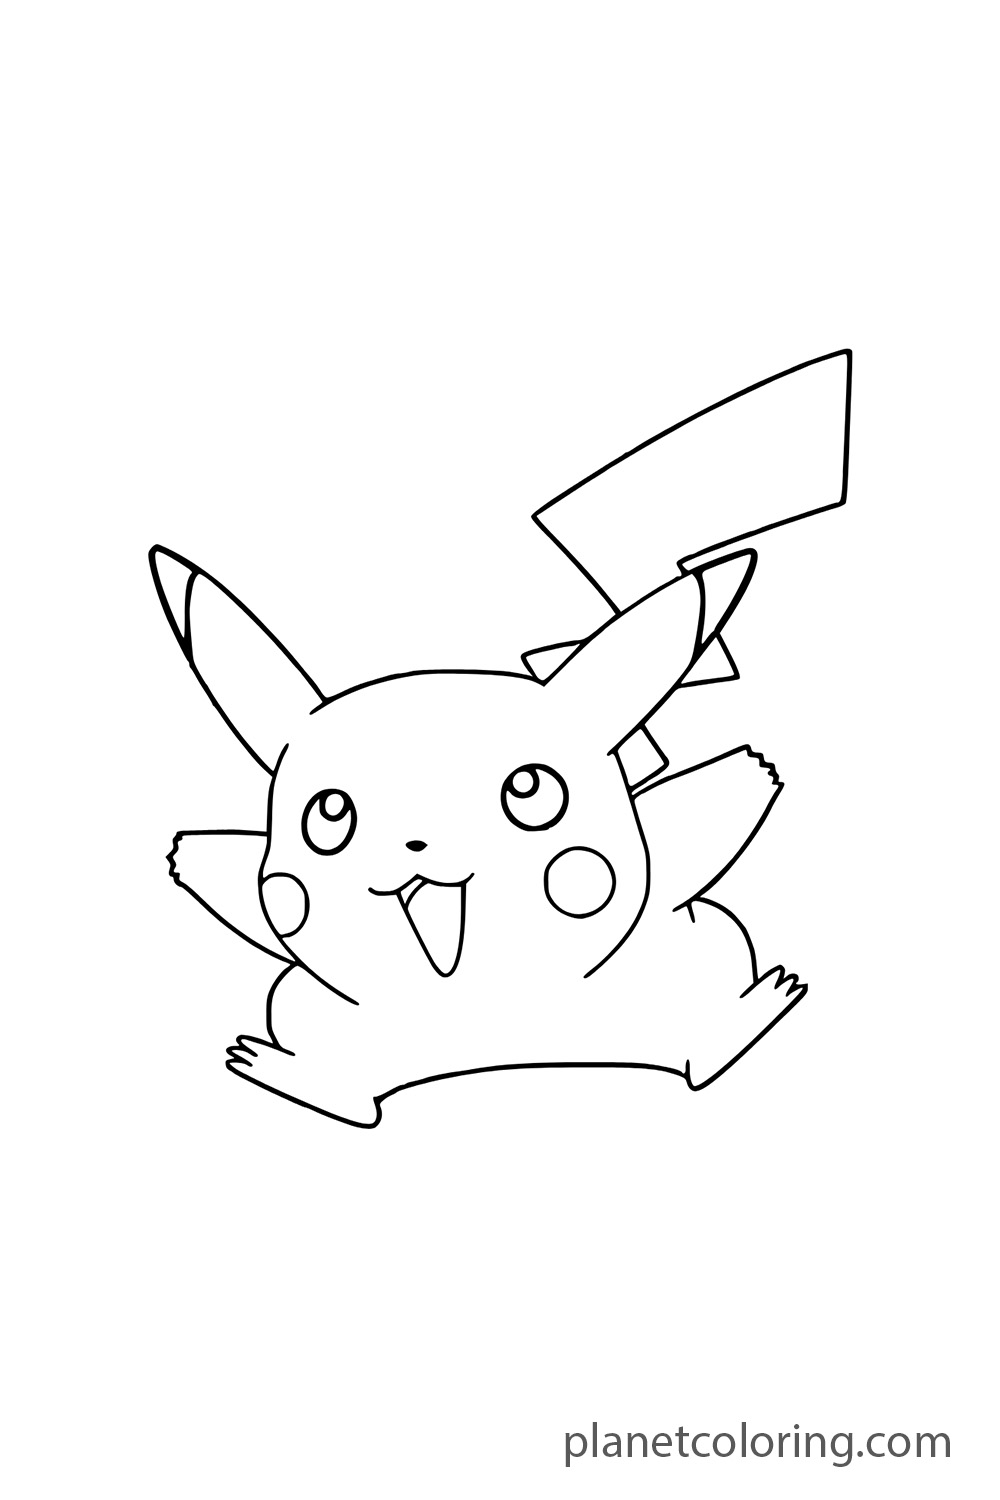 Pikachu in a playful pose